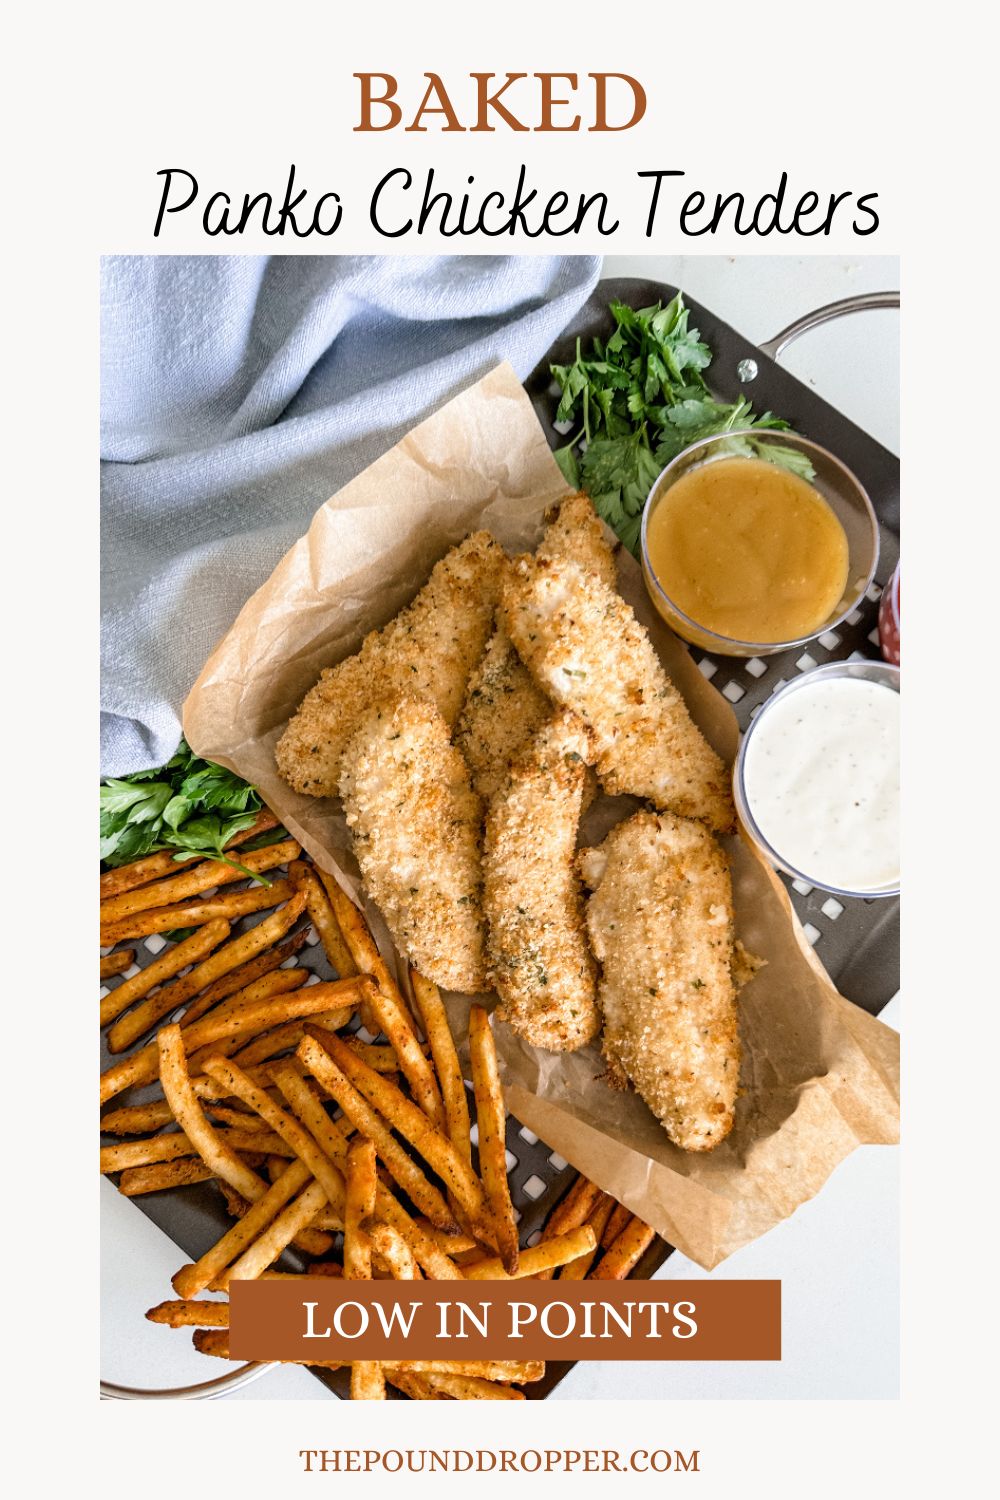 These Baked Panko Chicken Tenders are crispy on the outside, tender on the inside, and make for a delicious lunch or dinner! via @pounddropper